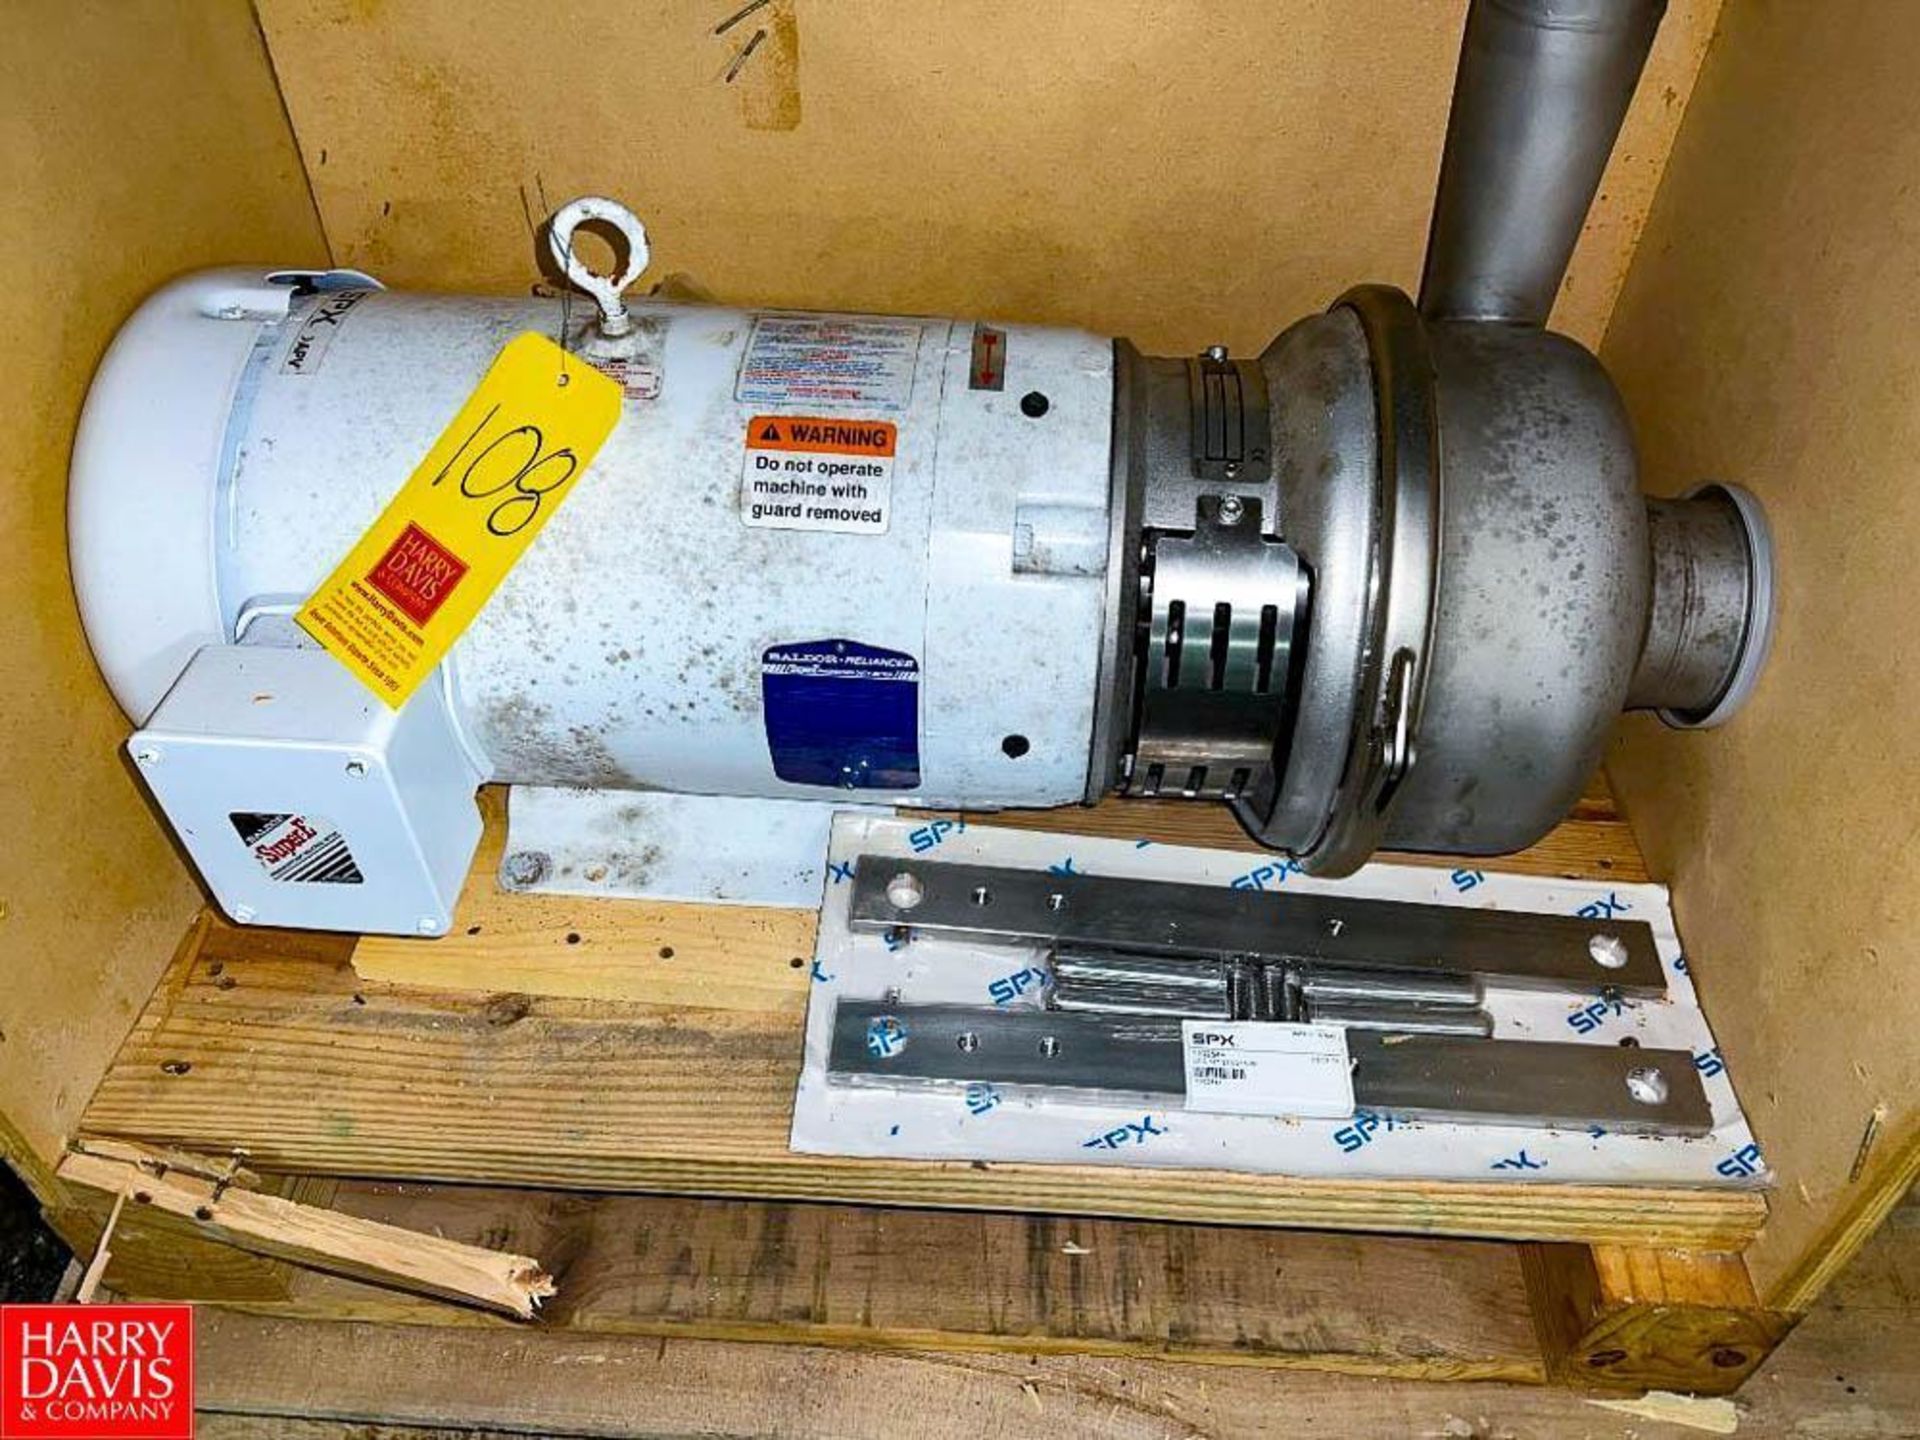 SPX CP, Model: W+ 30/120 with 15 HP 3,500 RPM Motor, 4" x 3" Head, Clamp-Type and New S/S Base Attac